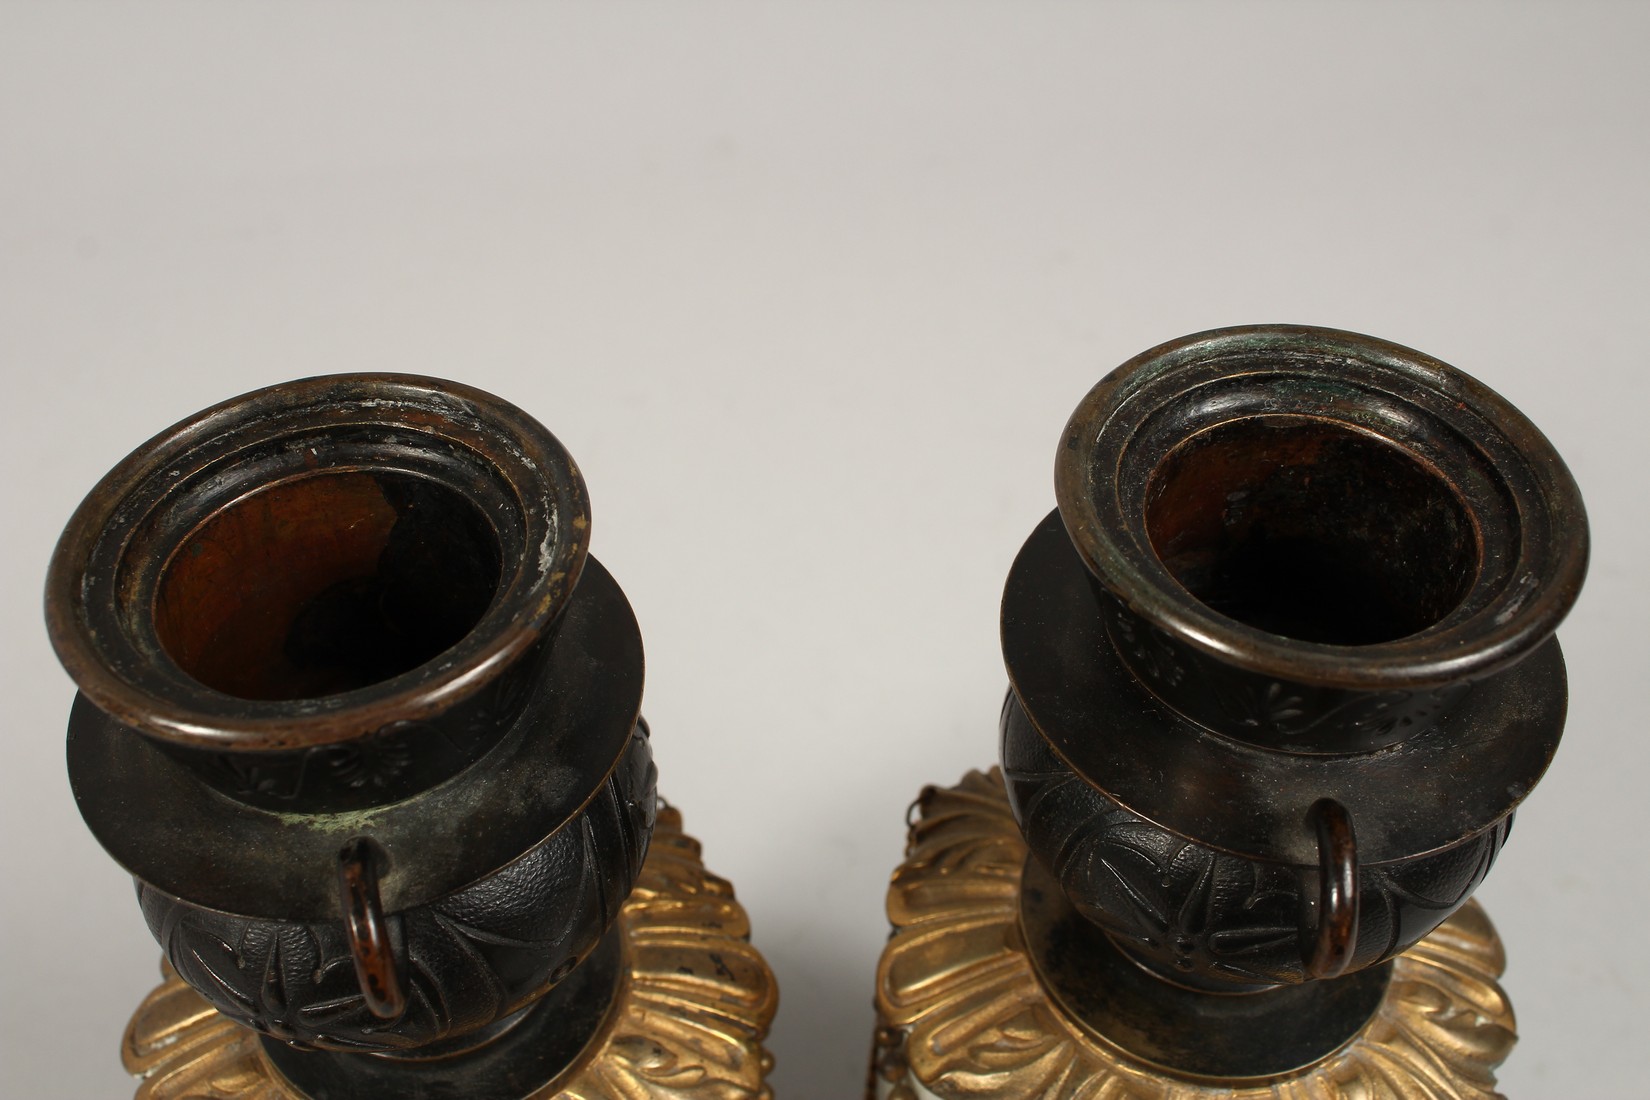 A VERY GOOD PAIR OF REGENCY, BRONZE AND MARBLE TWO-HANDLED CASSOLETTES ON STANDS hung with rope. 9. - Image 9 of 9